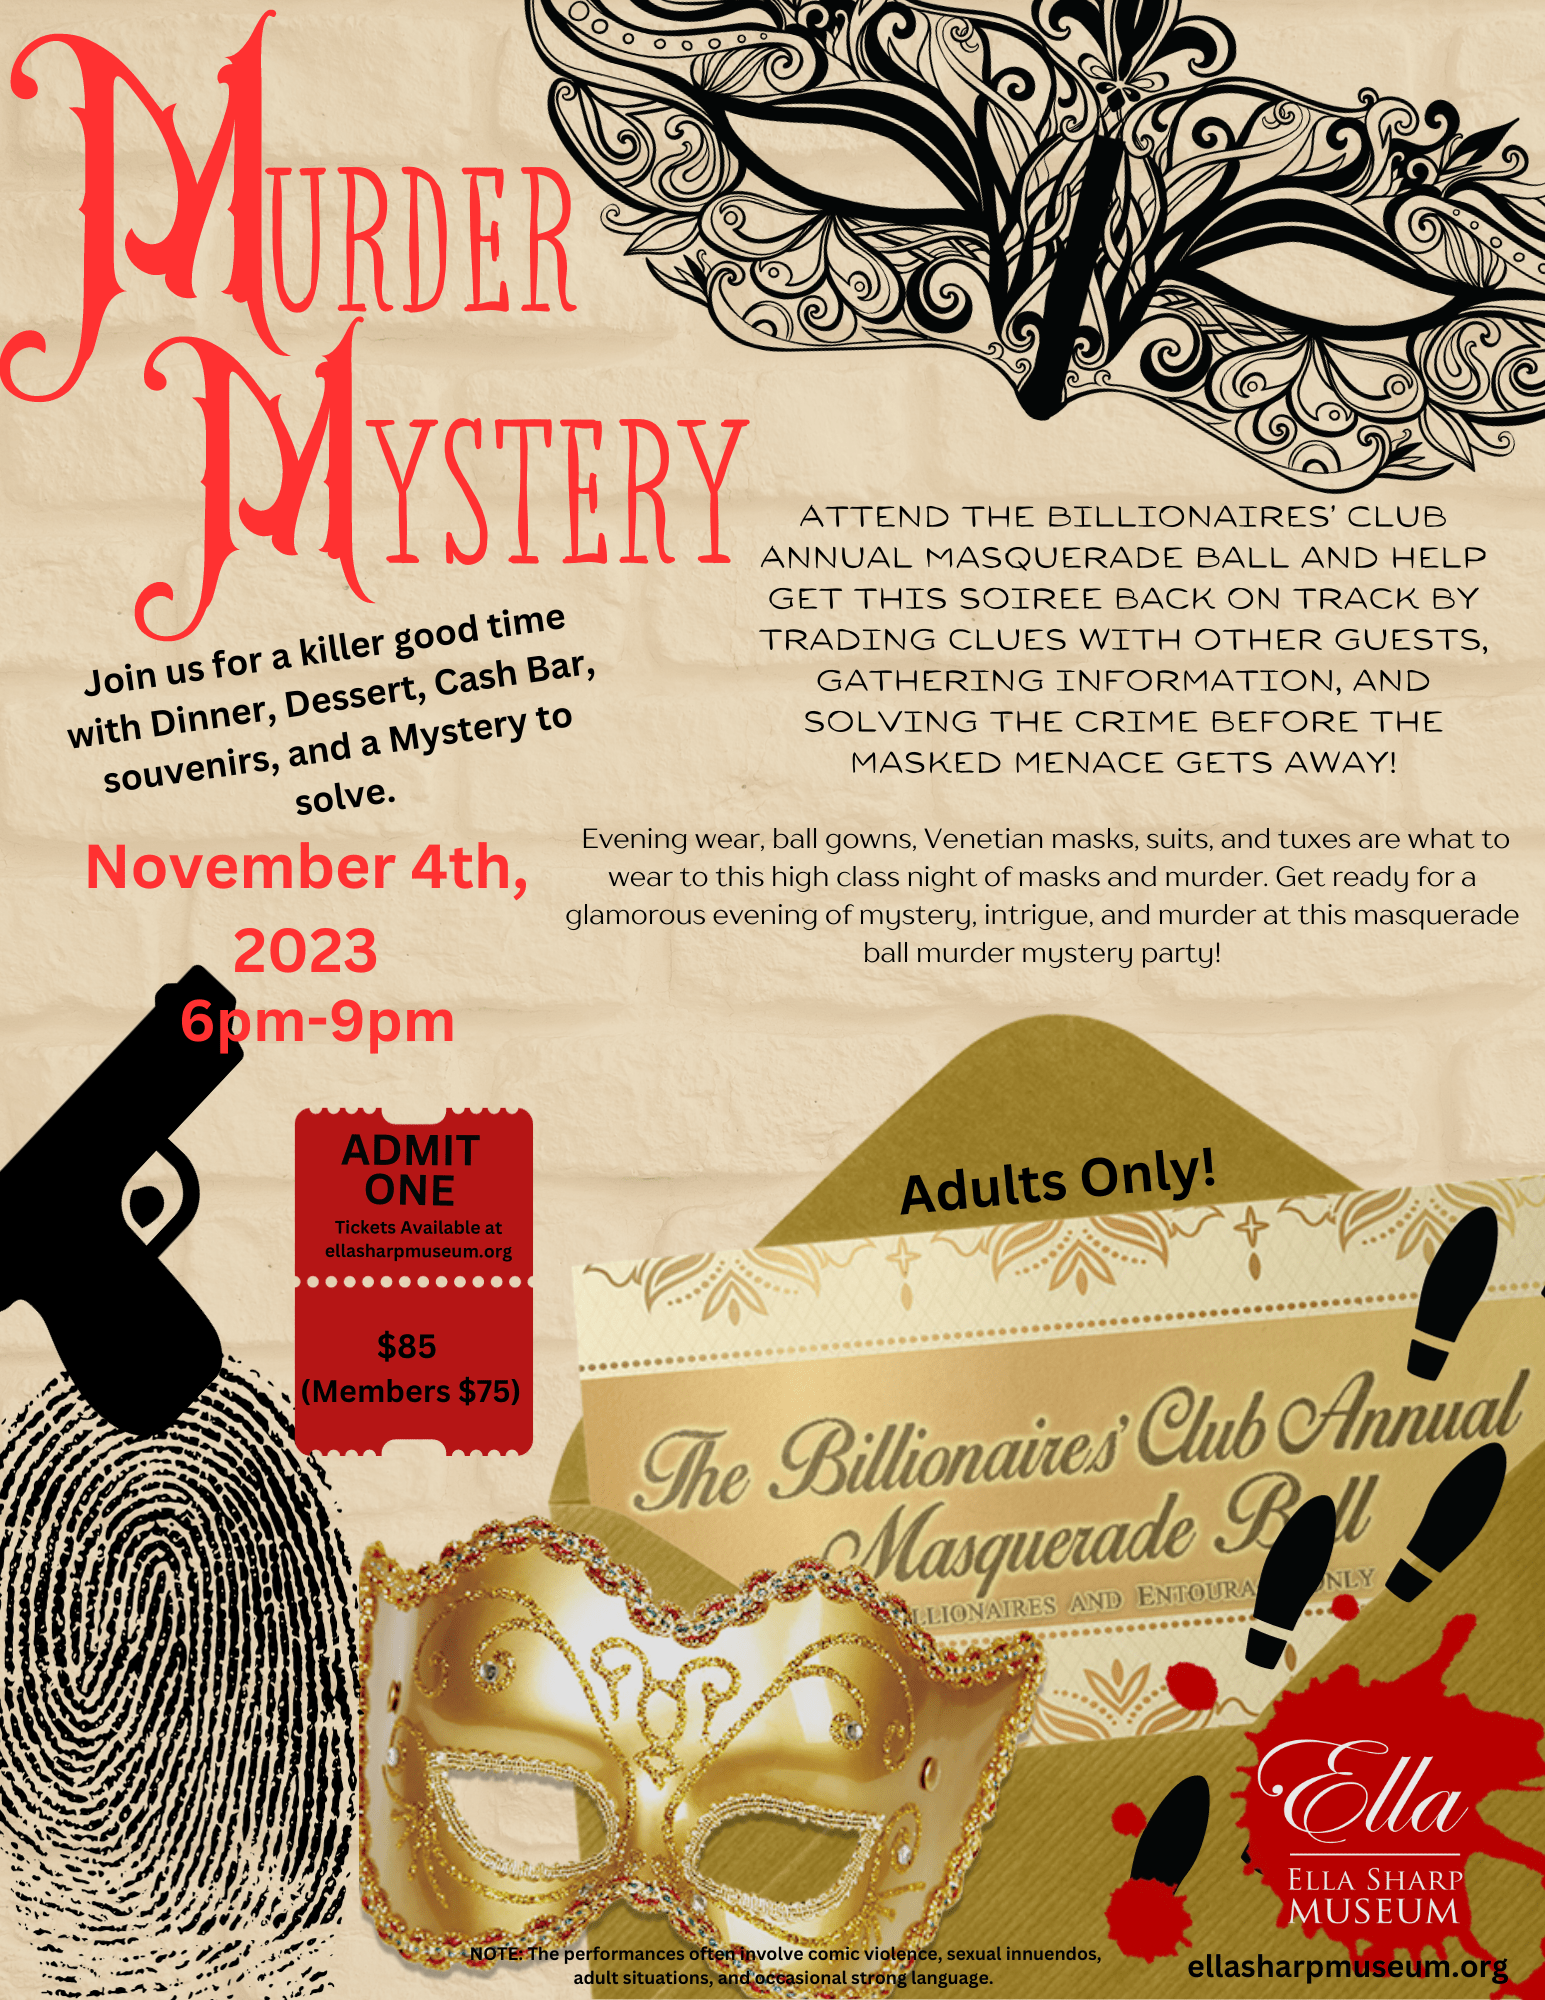 A Murder Mystery Dinner - A Party Like No Other